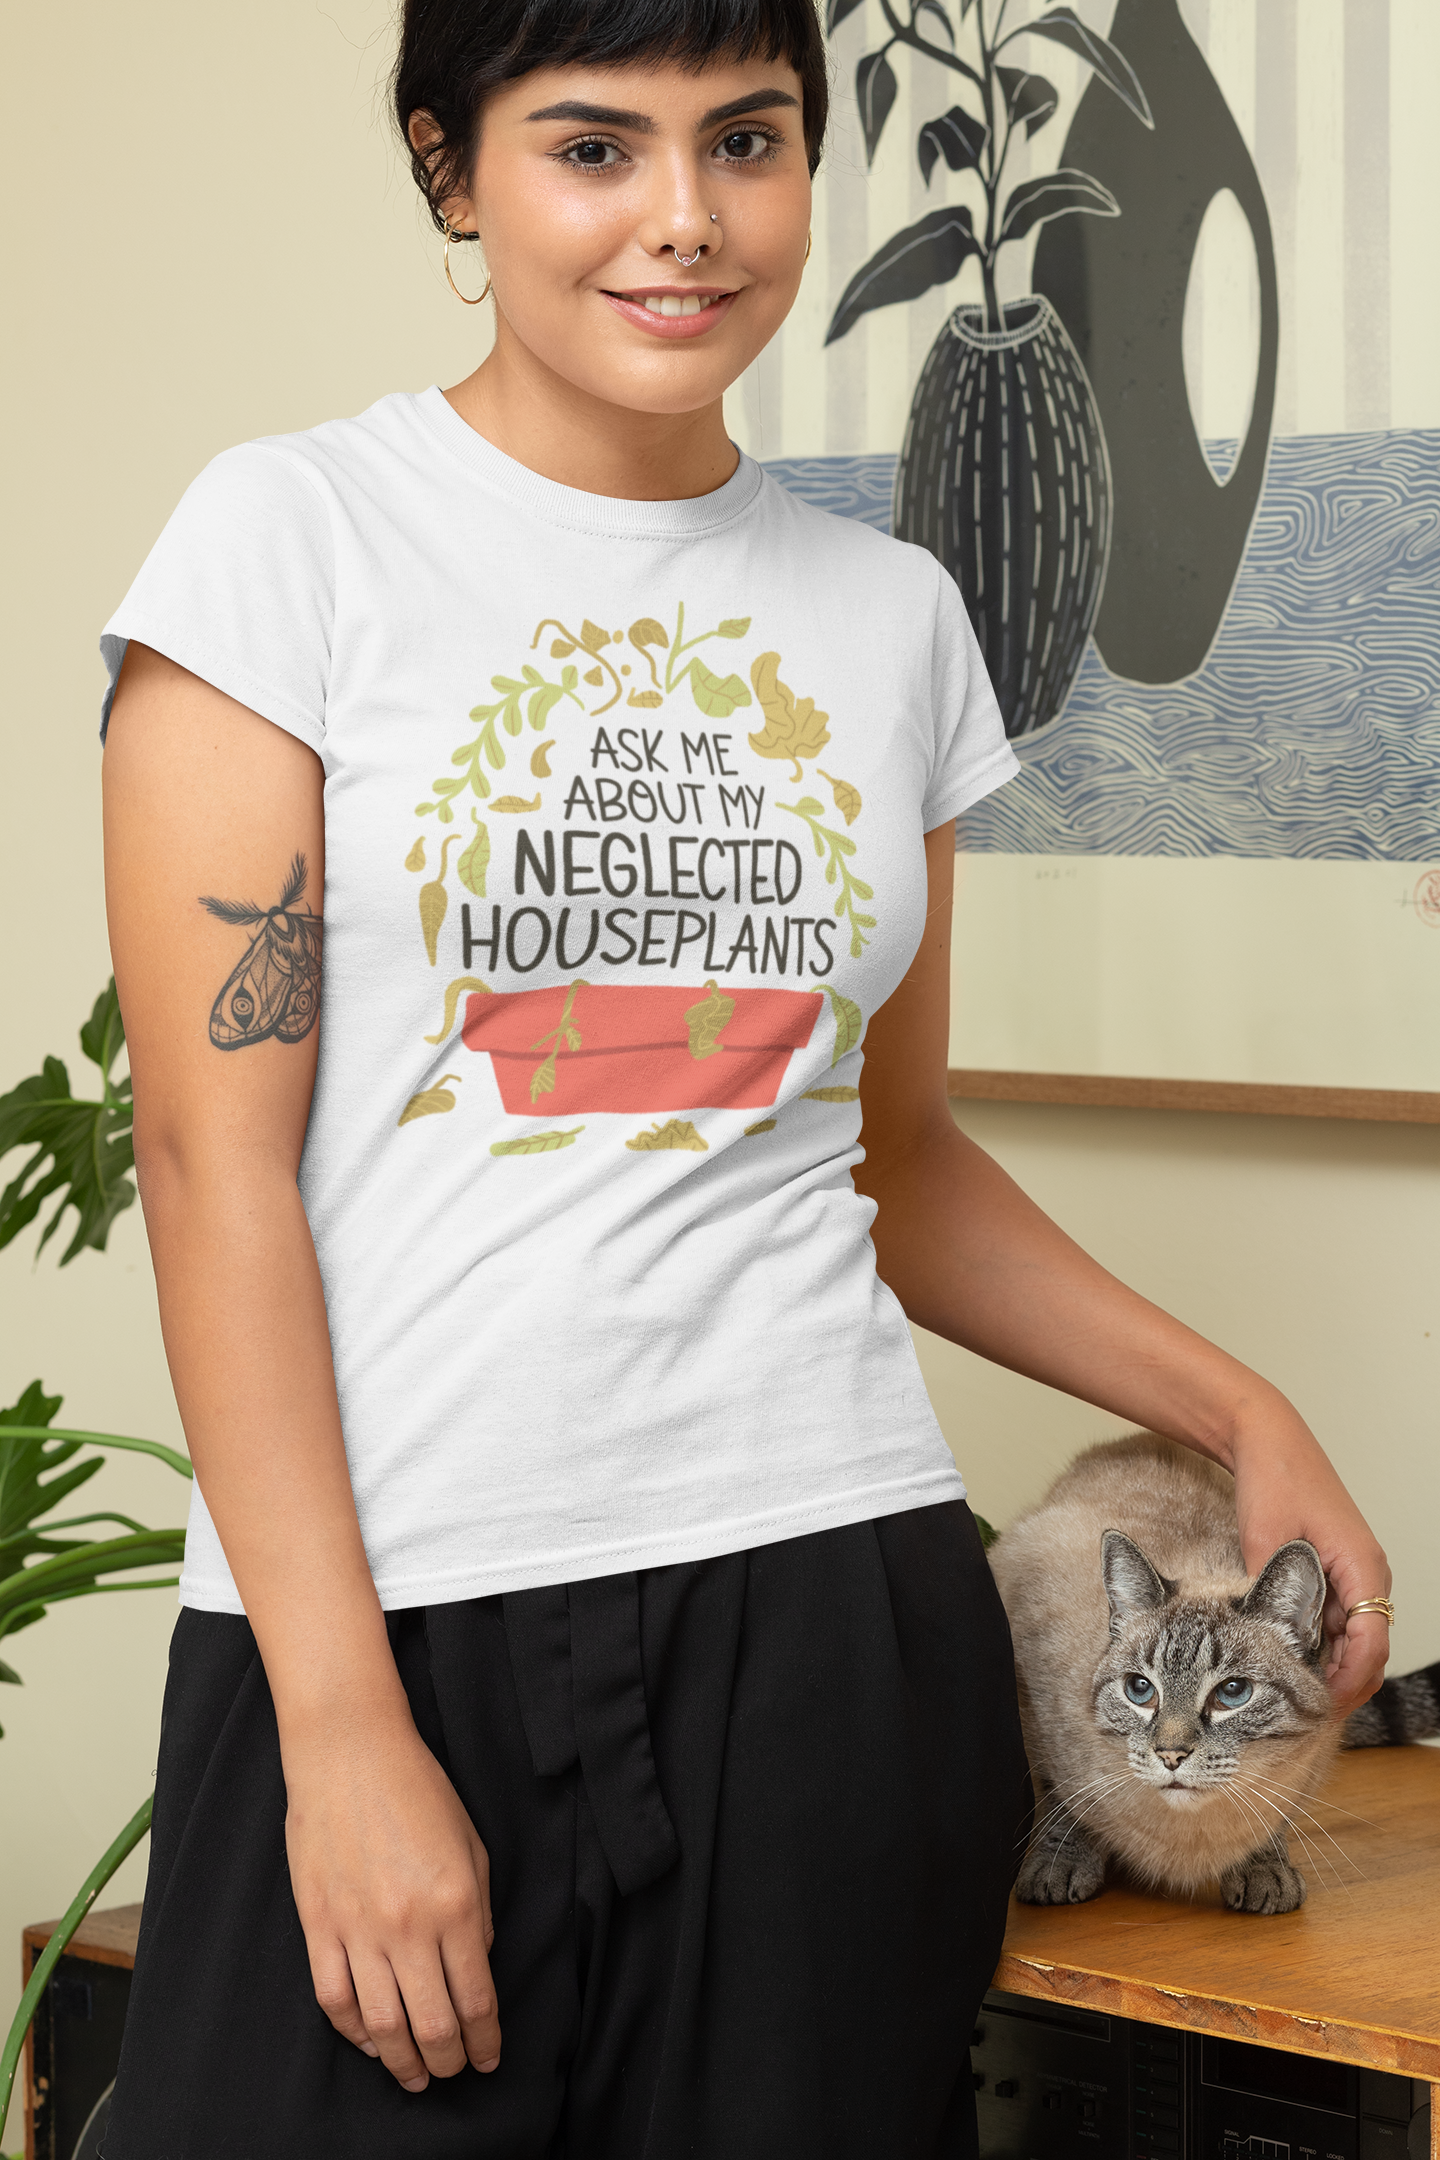 Neglected Houseplants - Funny Tee for Indoor Plant Lovers